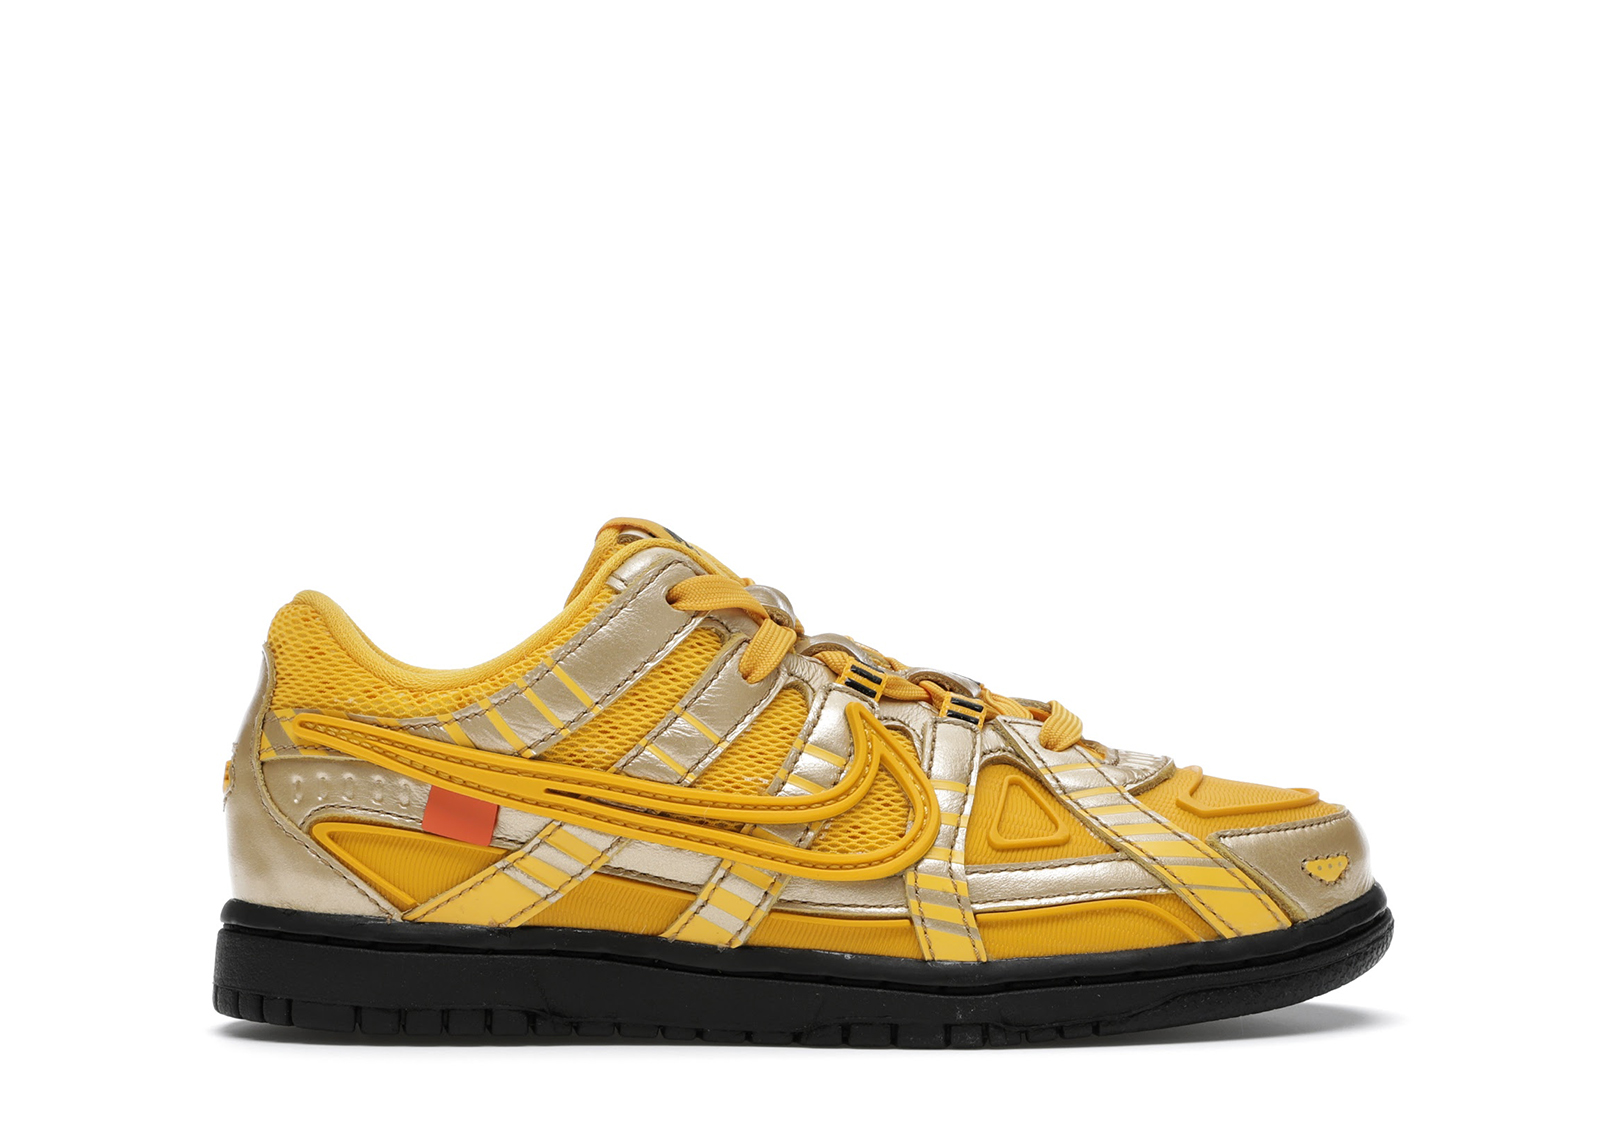 Nike Air Rubber Dunk Off-White University Gold (PS) - CW7410-700